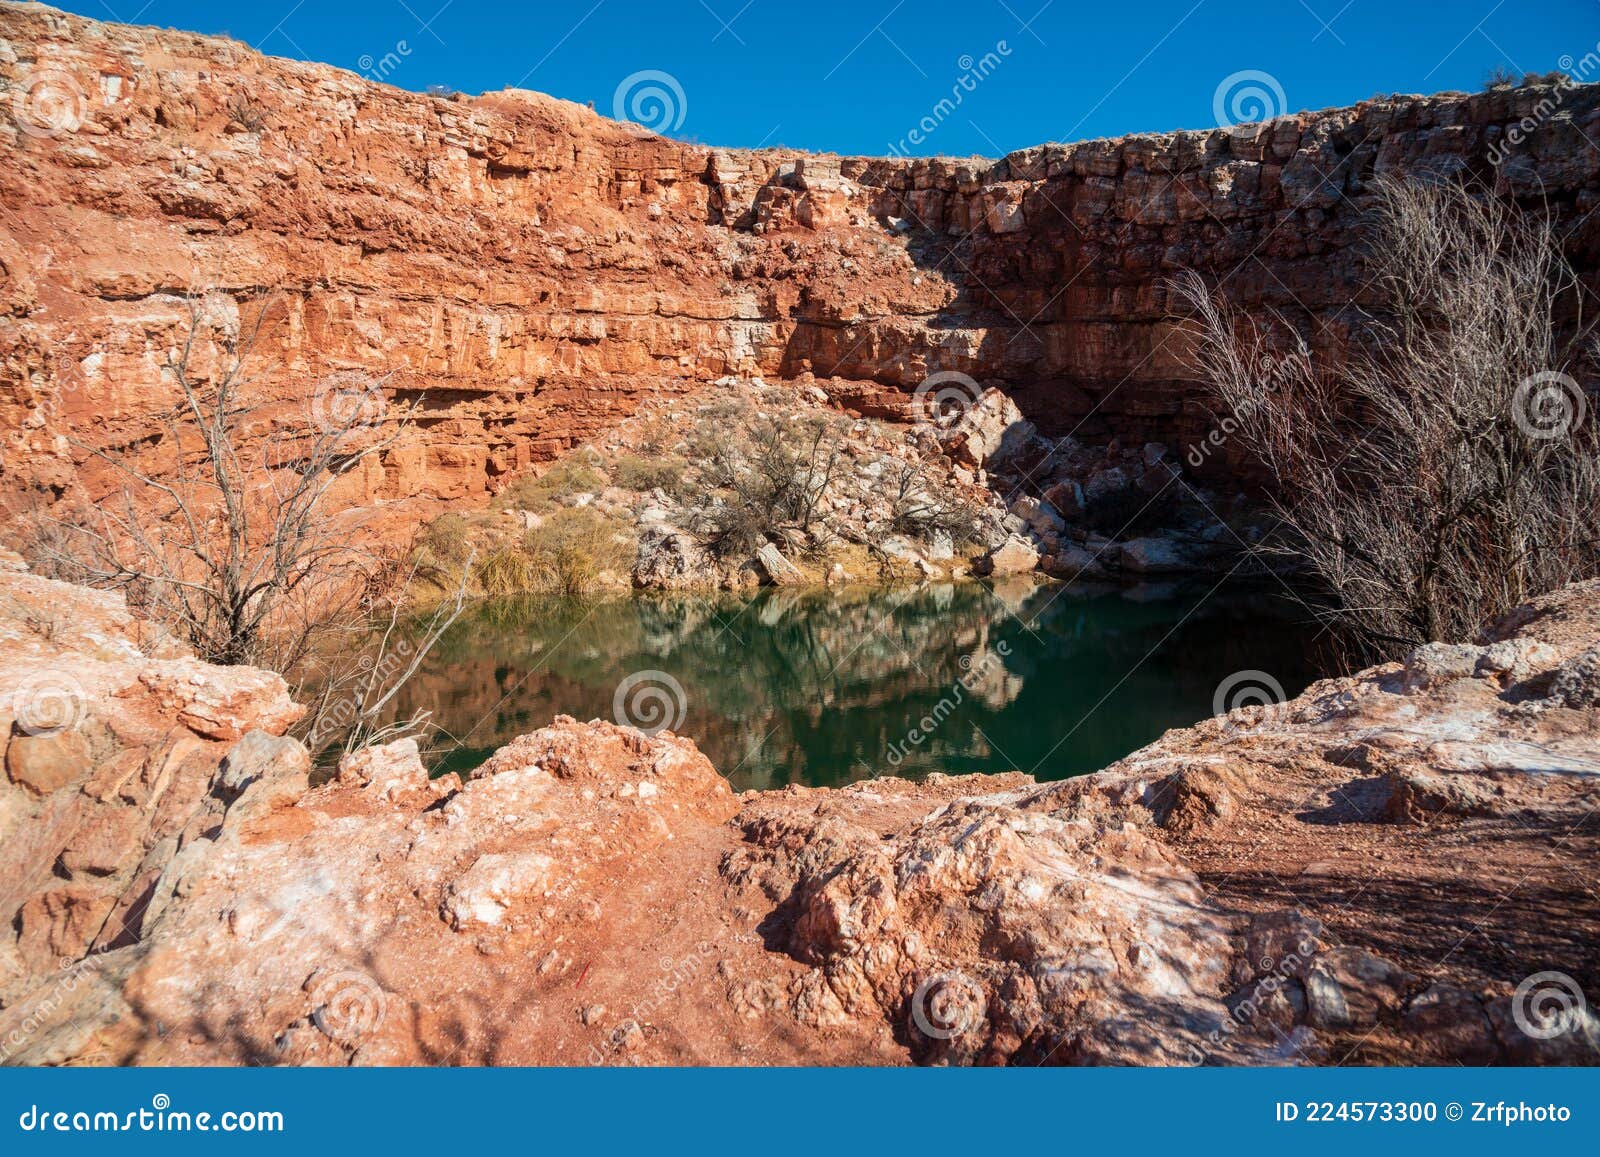 bottomless lakes state park in new mexico